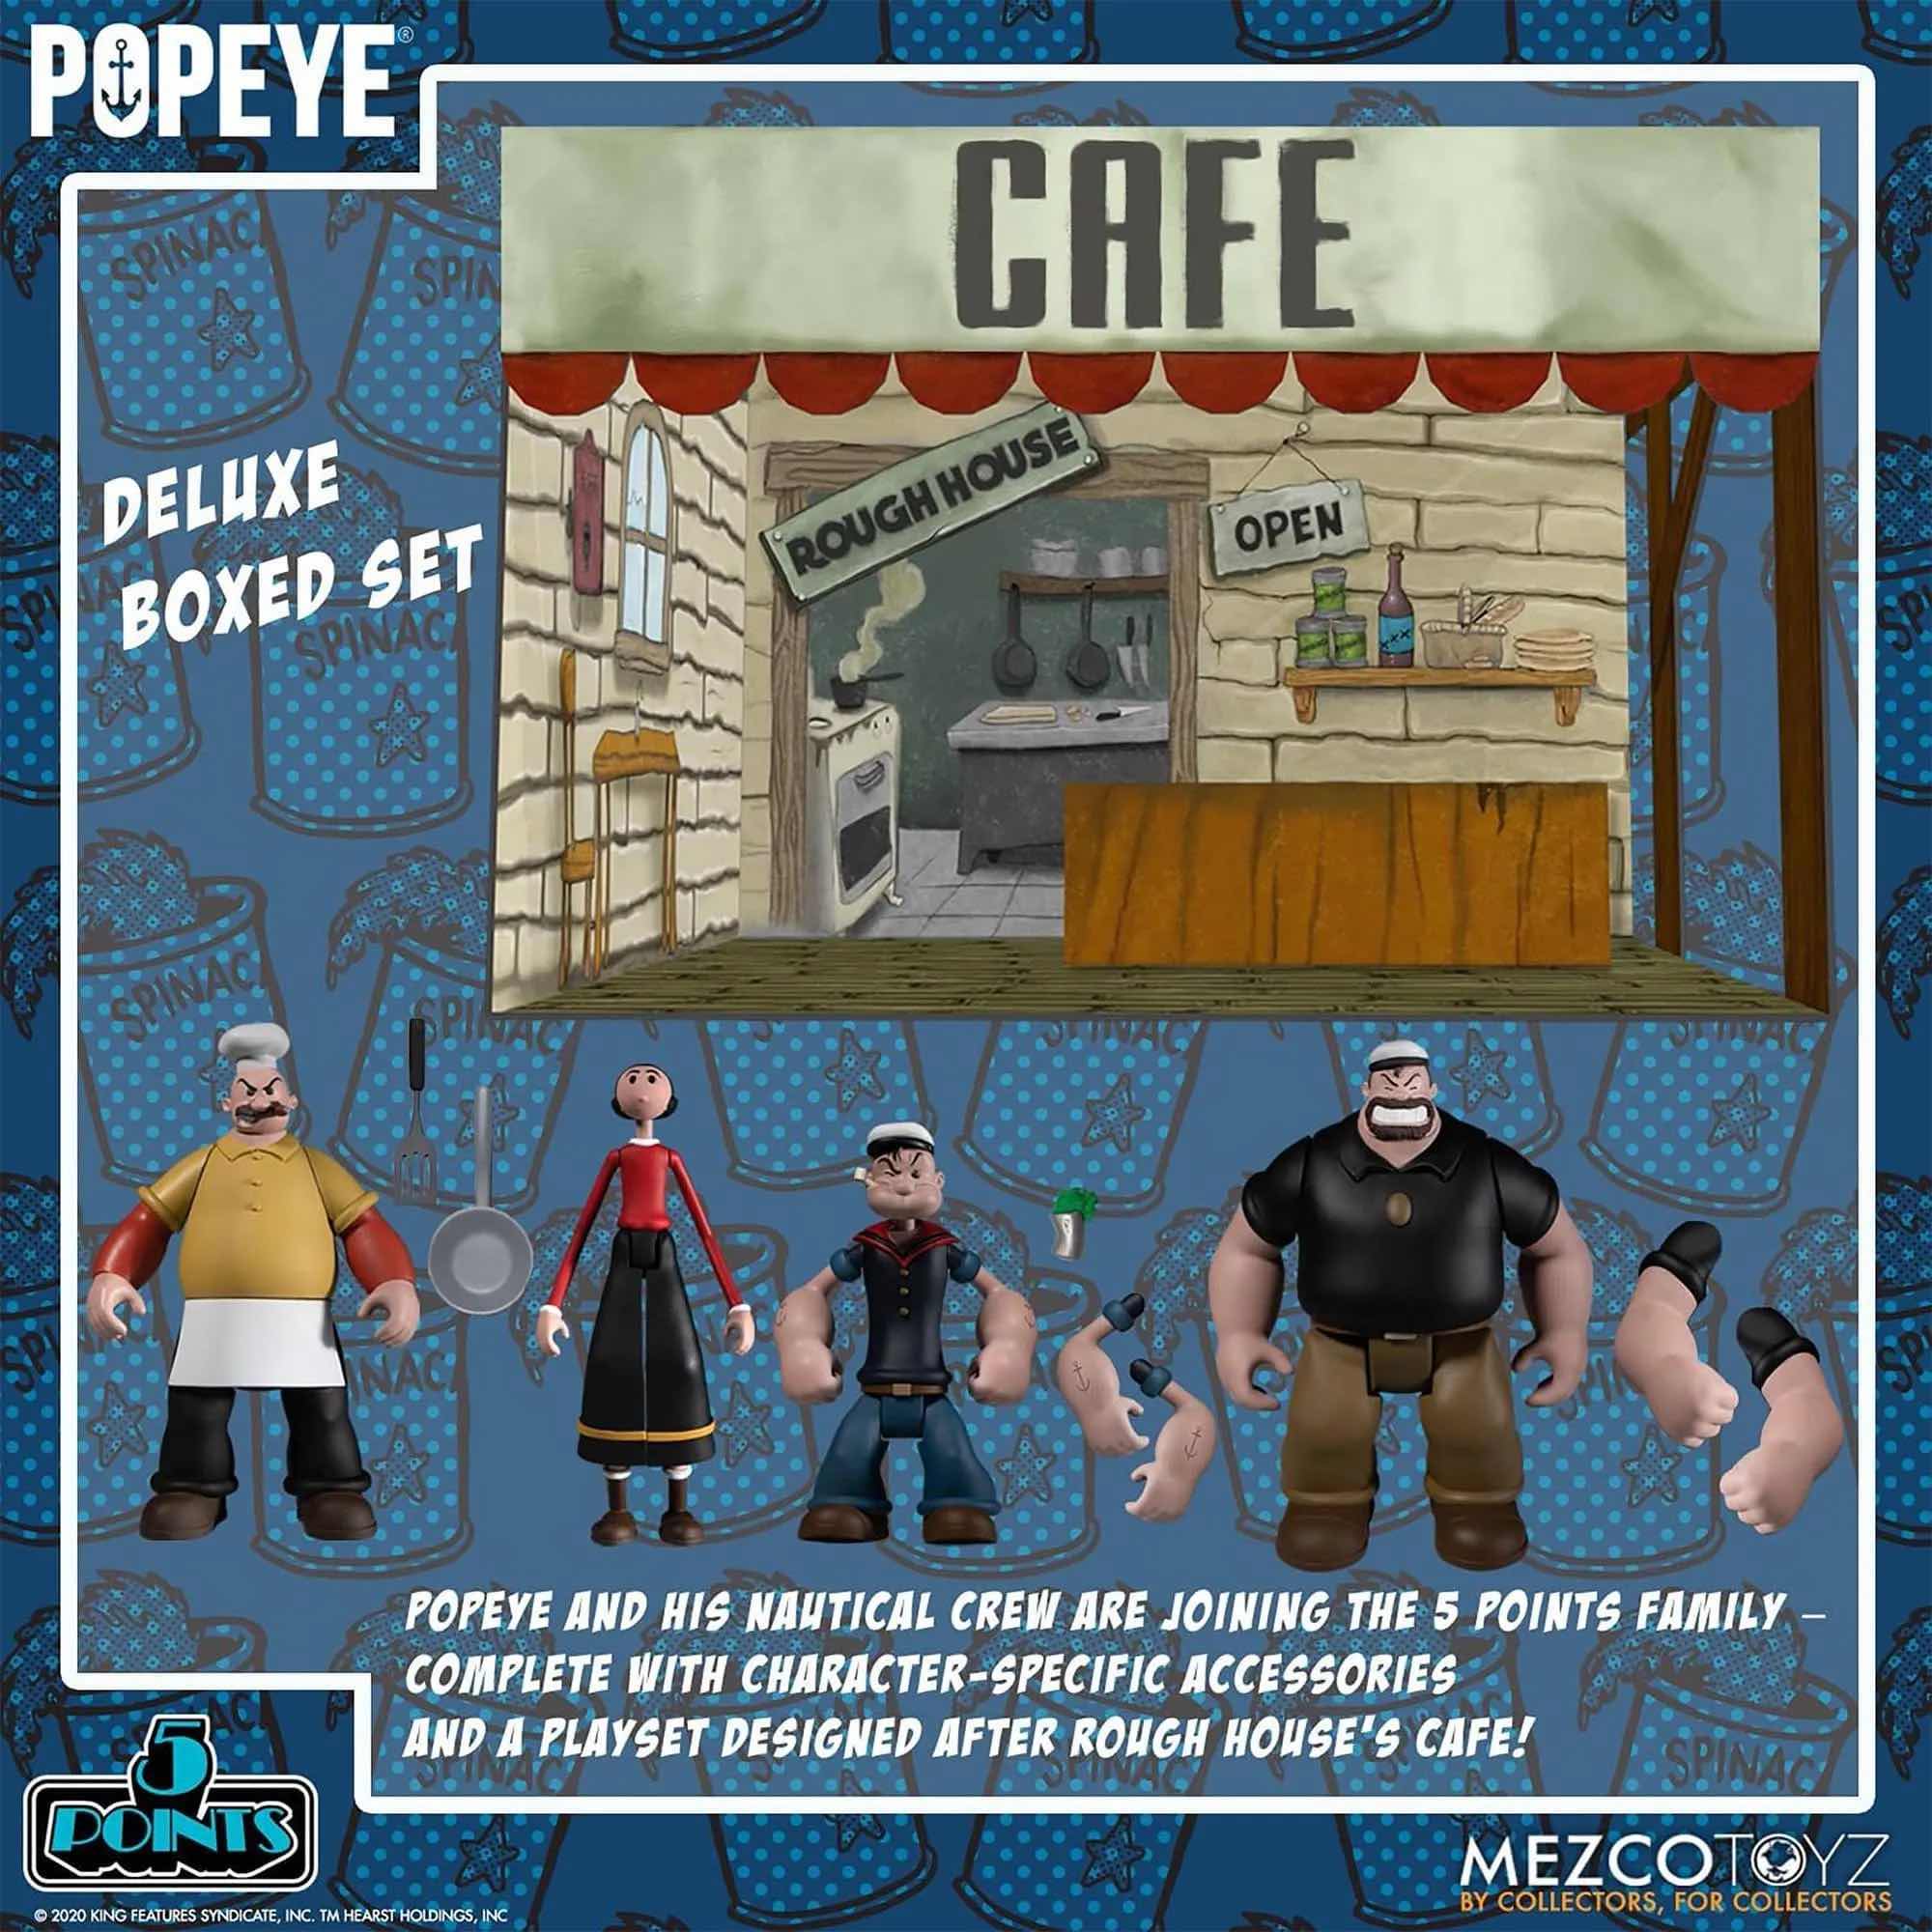 Photo 3 of NEW MEZCO TOYZ 5 POINTS POPEYE DELUXE ACTION FIGURES & ACCESSORIES BOX SET (3-PACK)